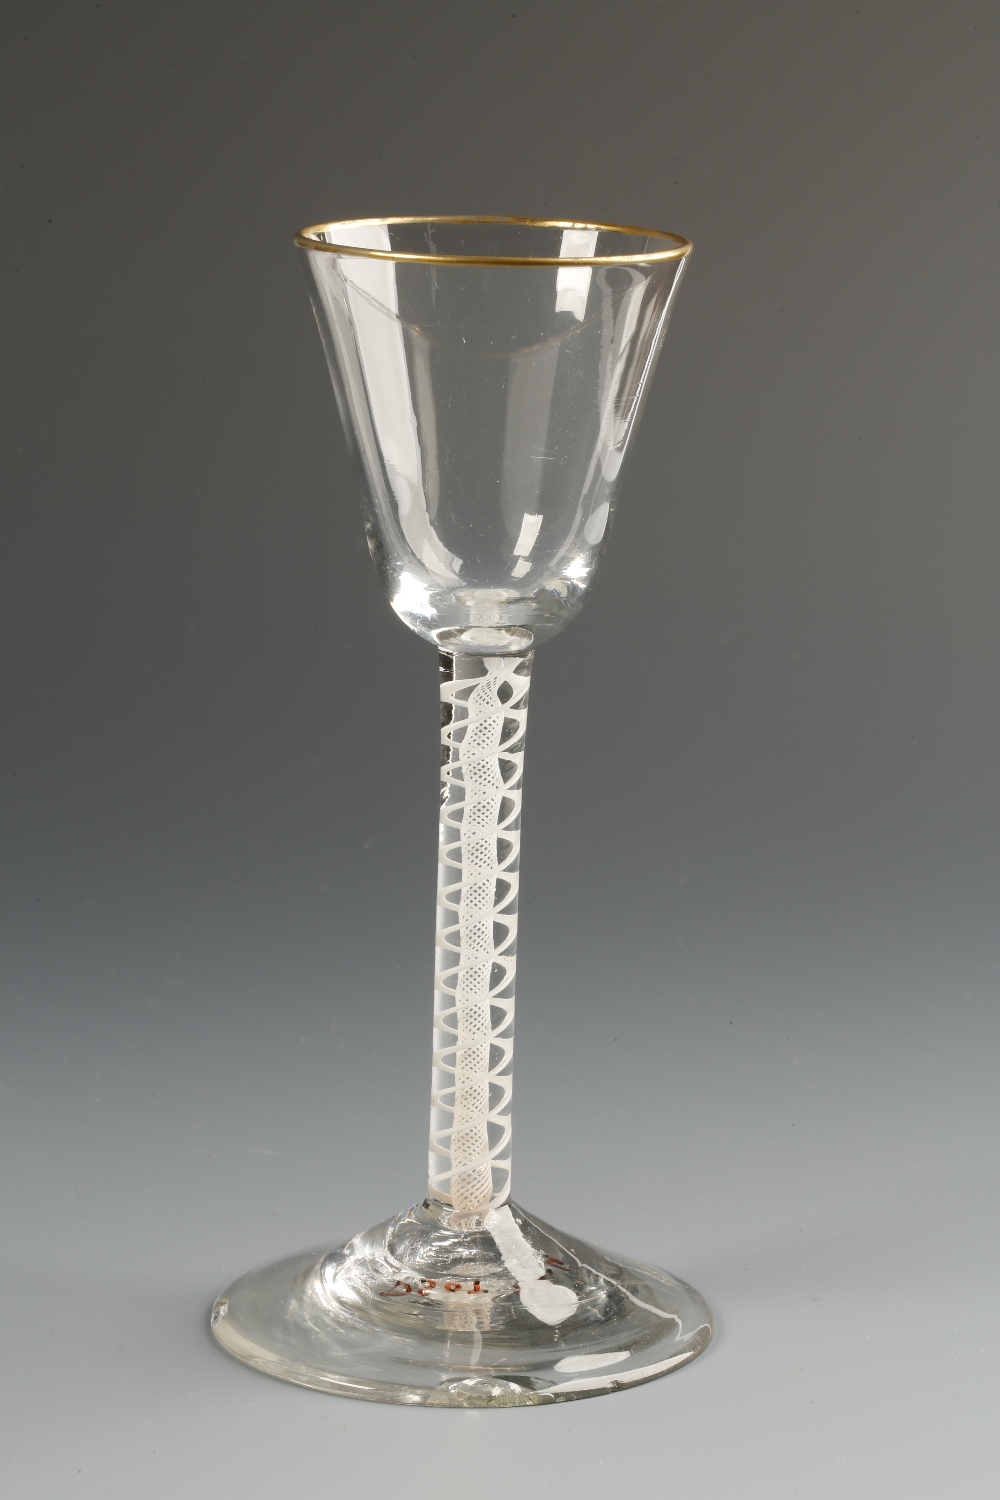 AN 18TH CENTURY SMALL WINE GLASS with a plain tapering bowl with gilt rim, on a spiral gauze air-